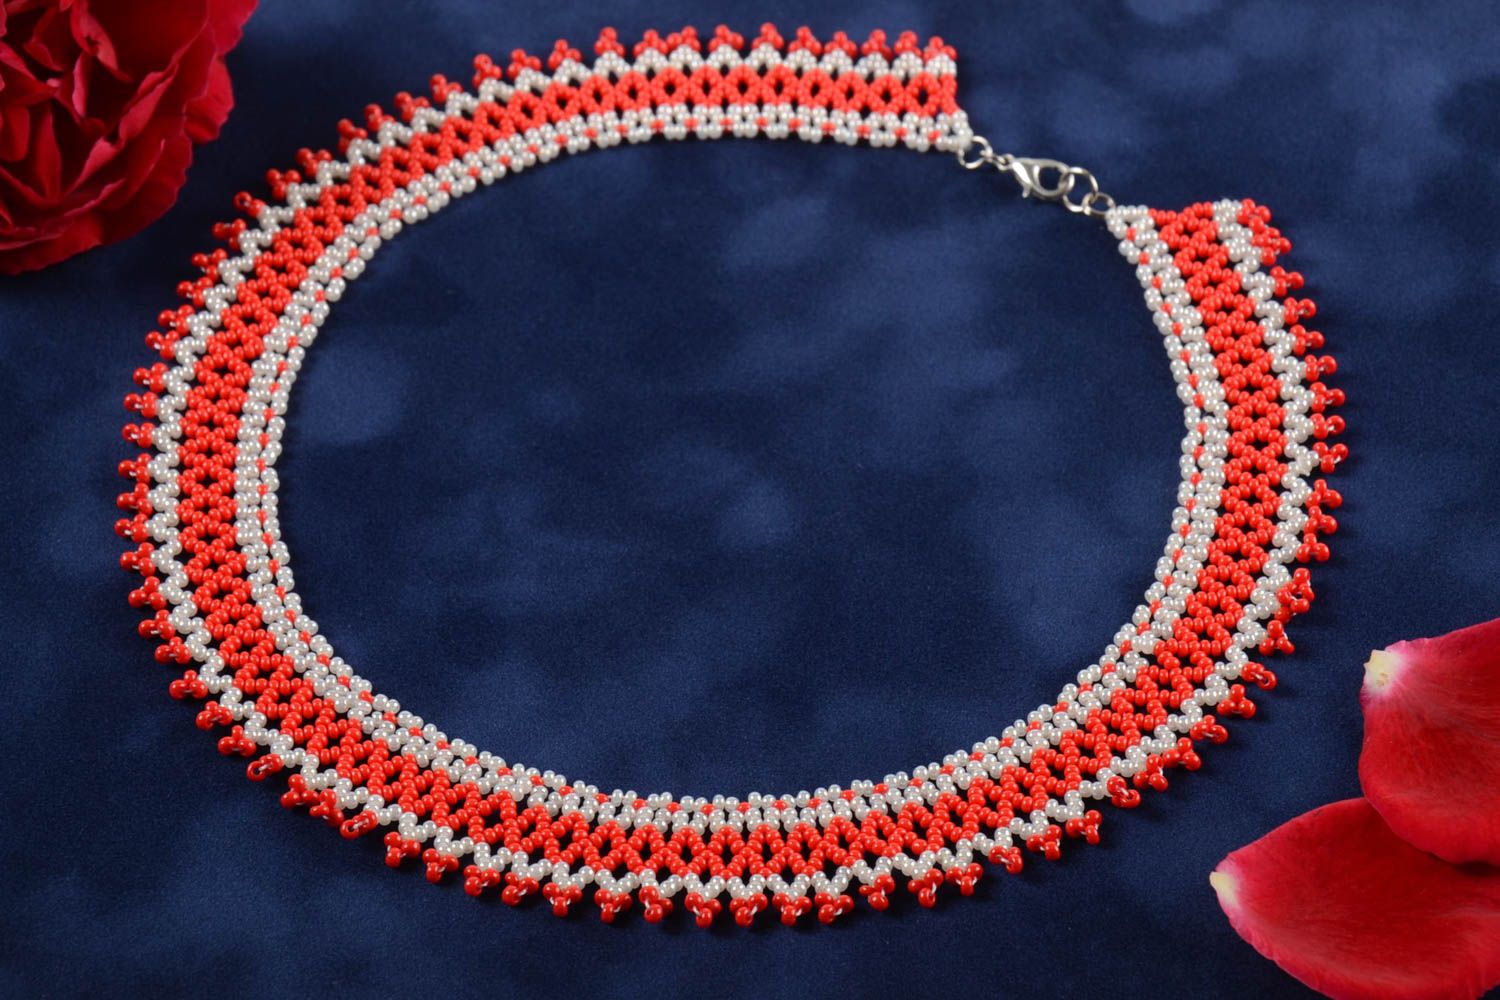 Handmade long beaded necklace unusual necklace for girls bead weaving ideas photo 1